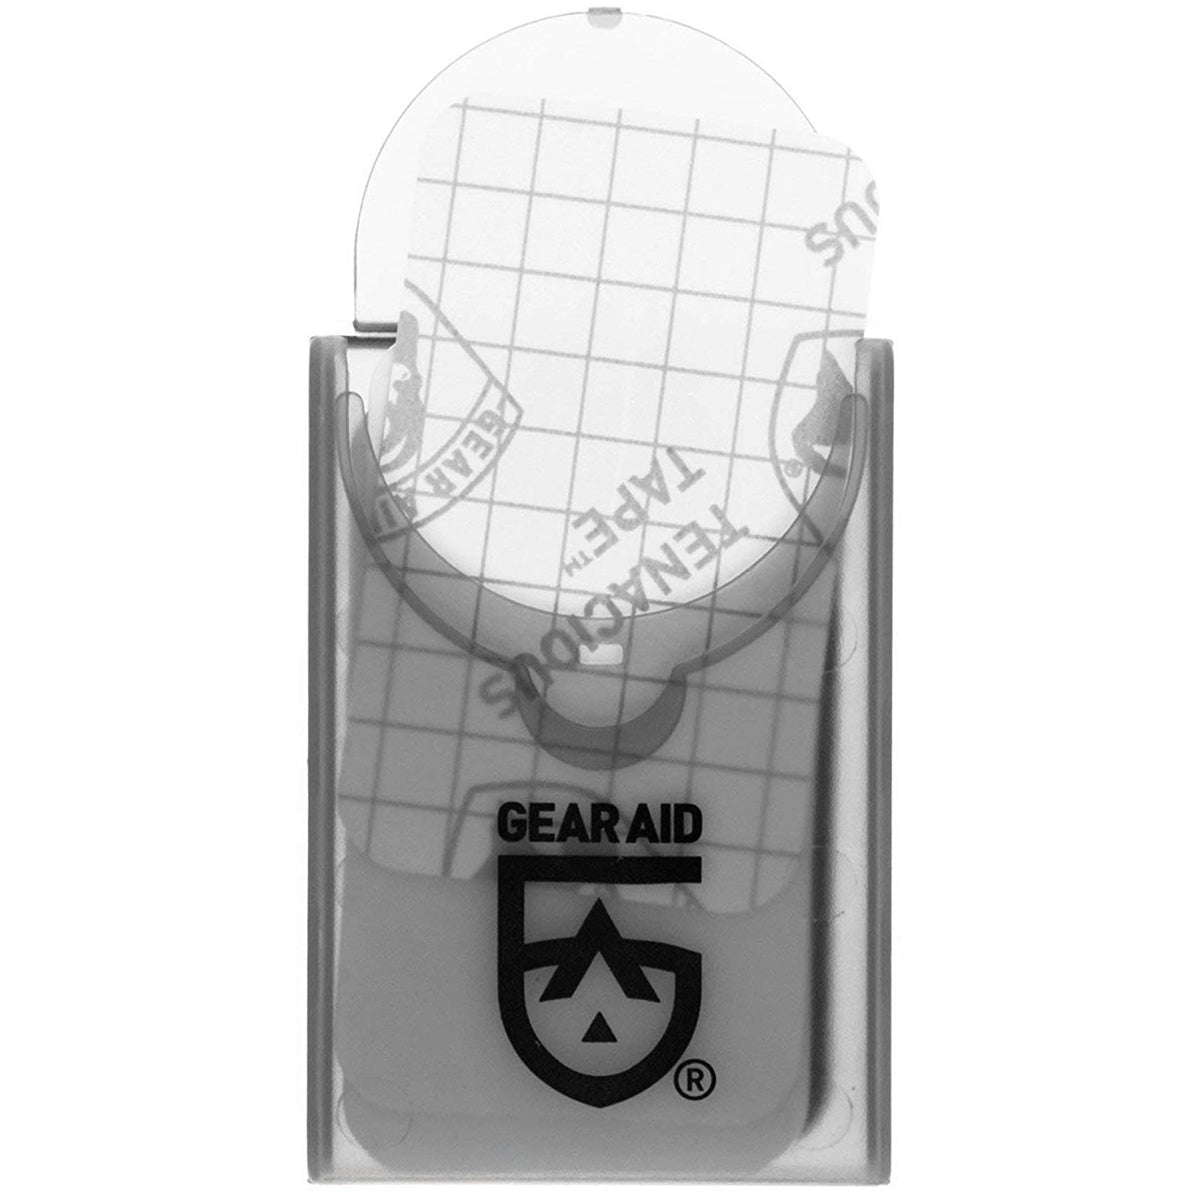 Gear Aid Tenacious Tape 1.5" x 2.5" No-Sew Peel and Stick Mini Patches - 2-Pack Gear Aid